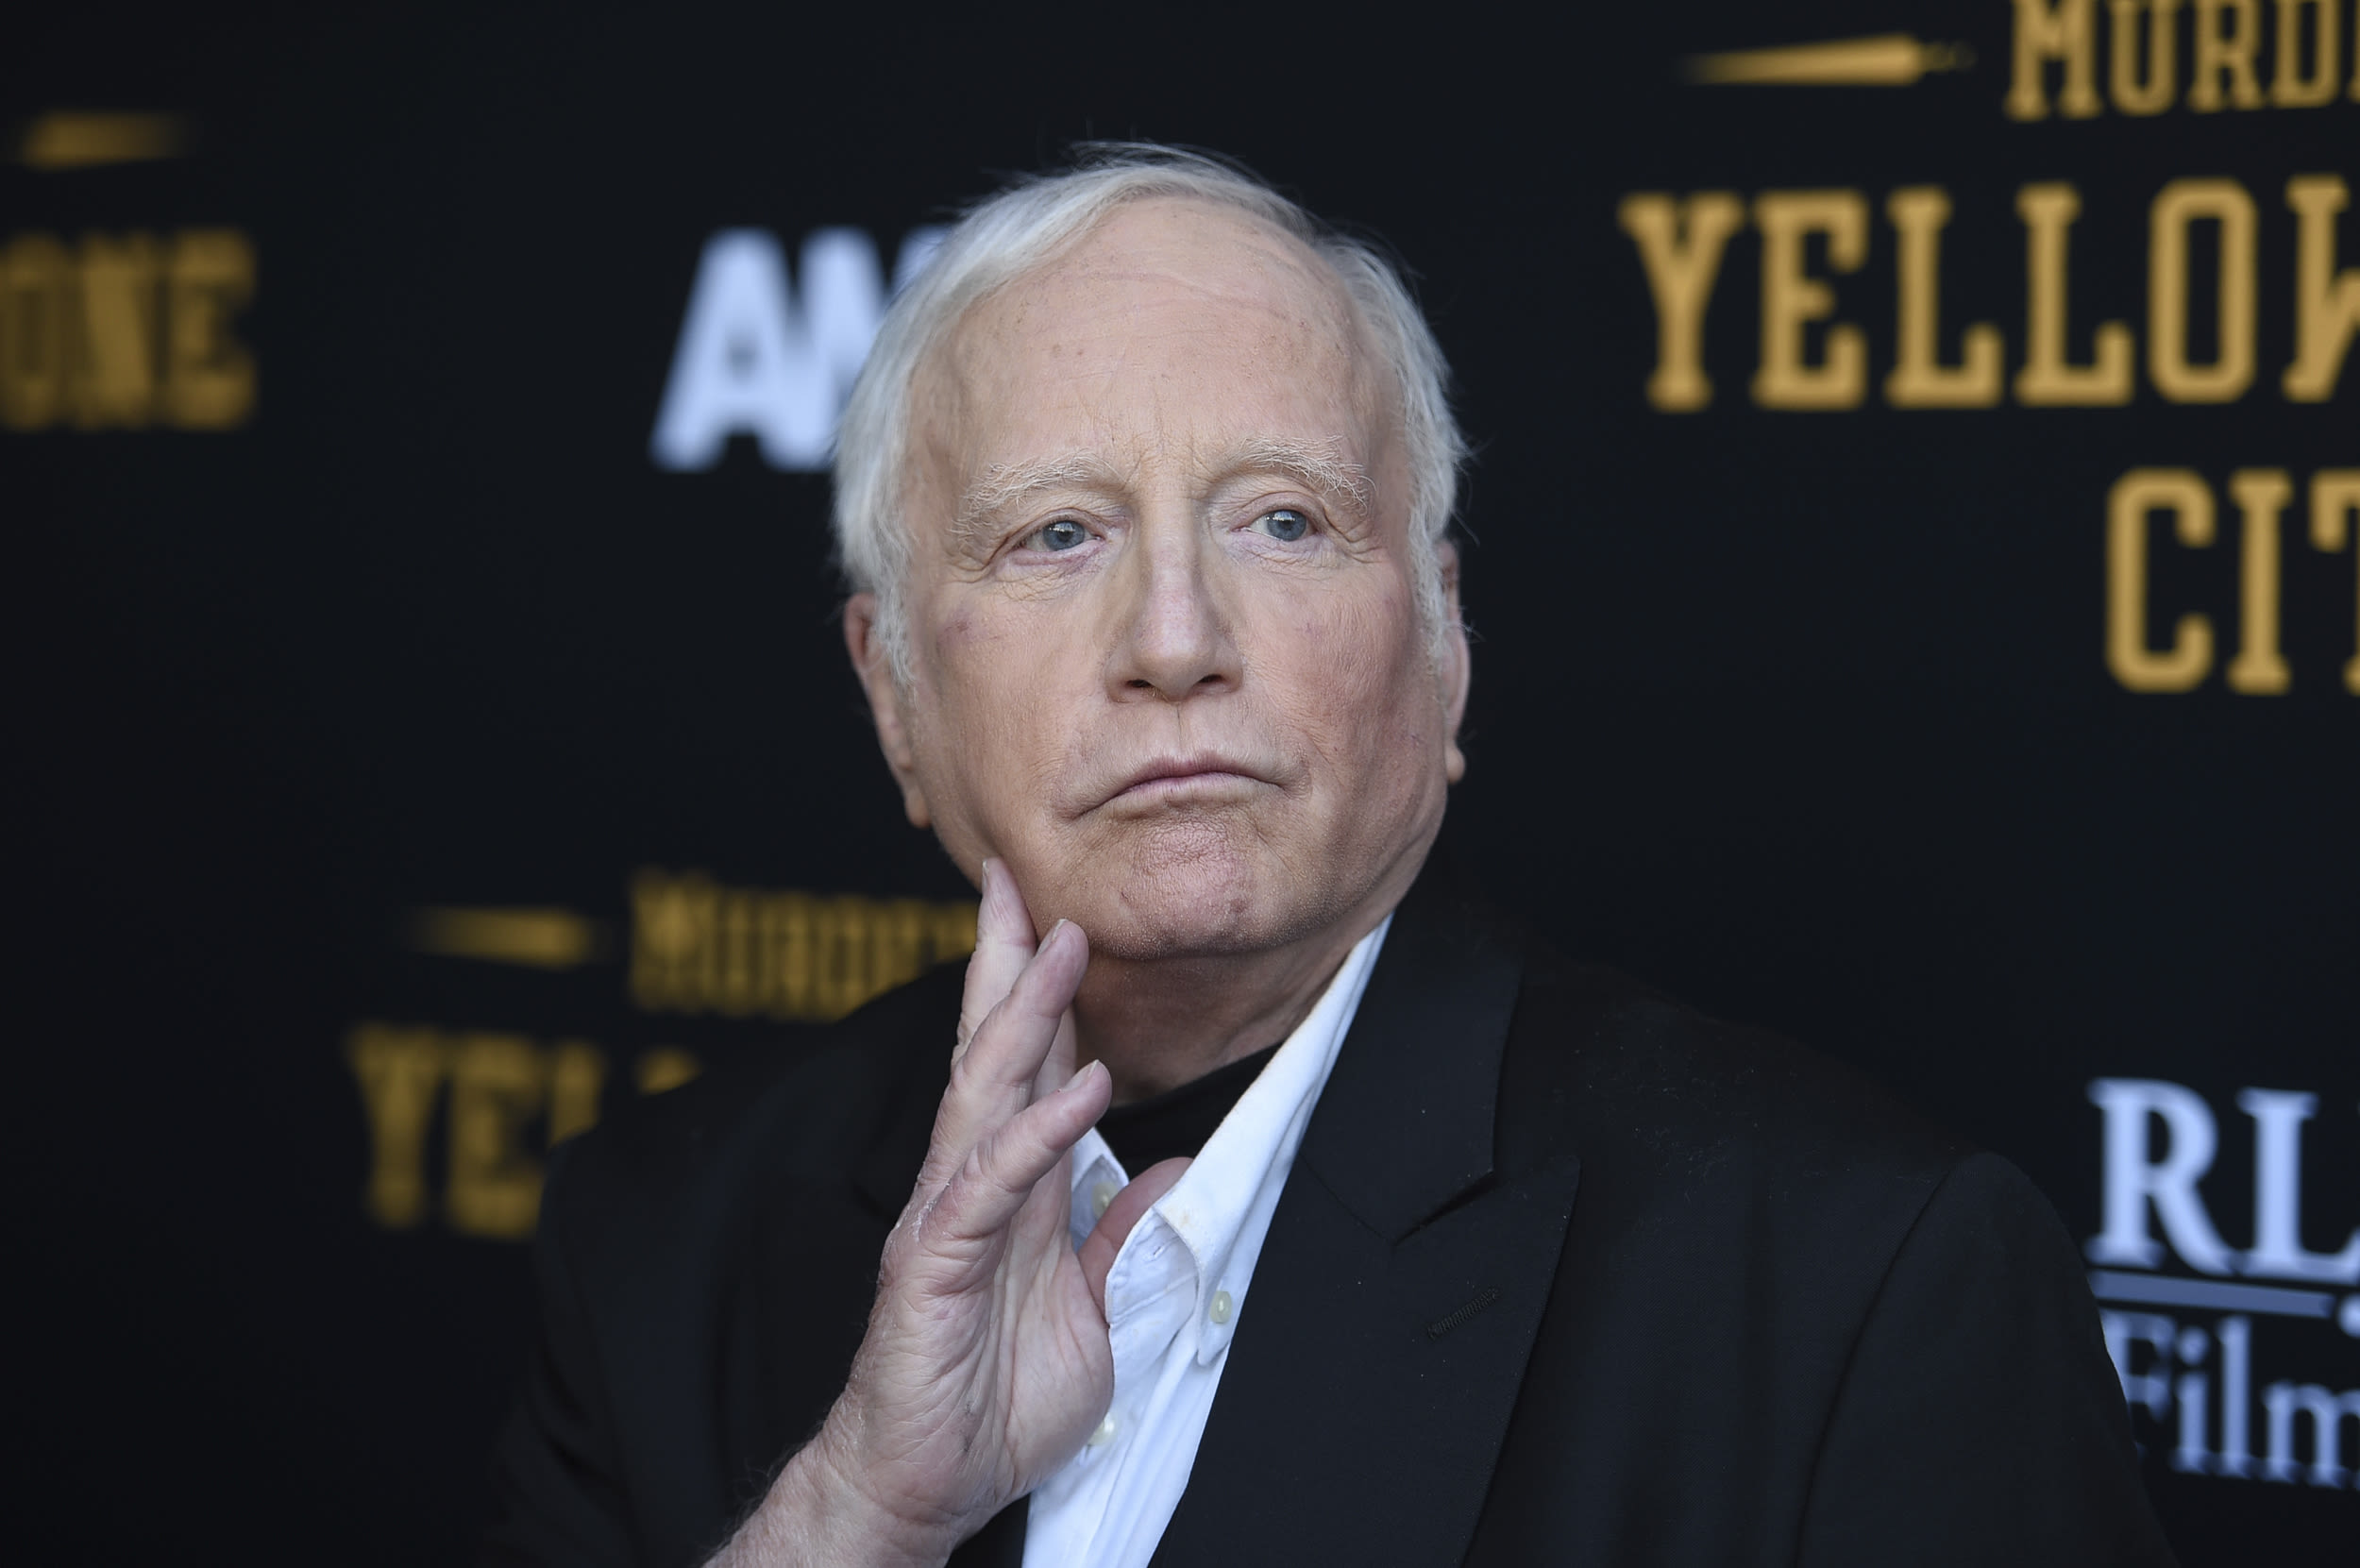 Richard Dreyfuss' 'distressing and offensive' rant has prompted a Massachusetts theater to apologize